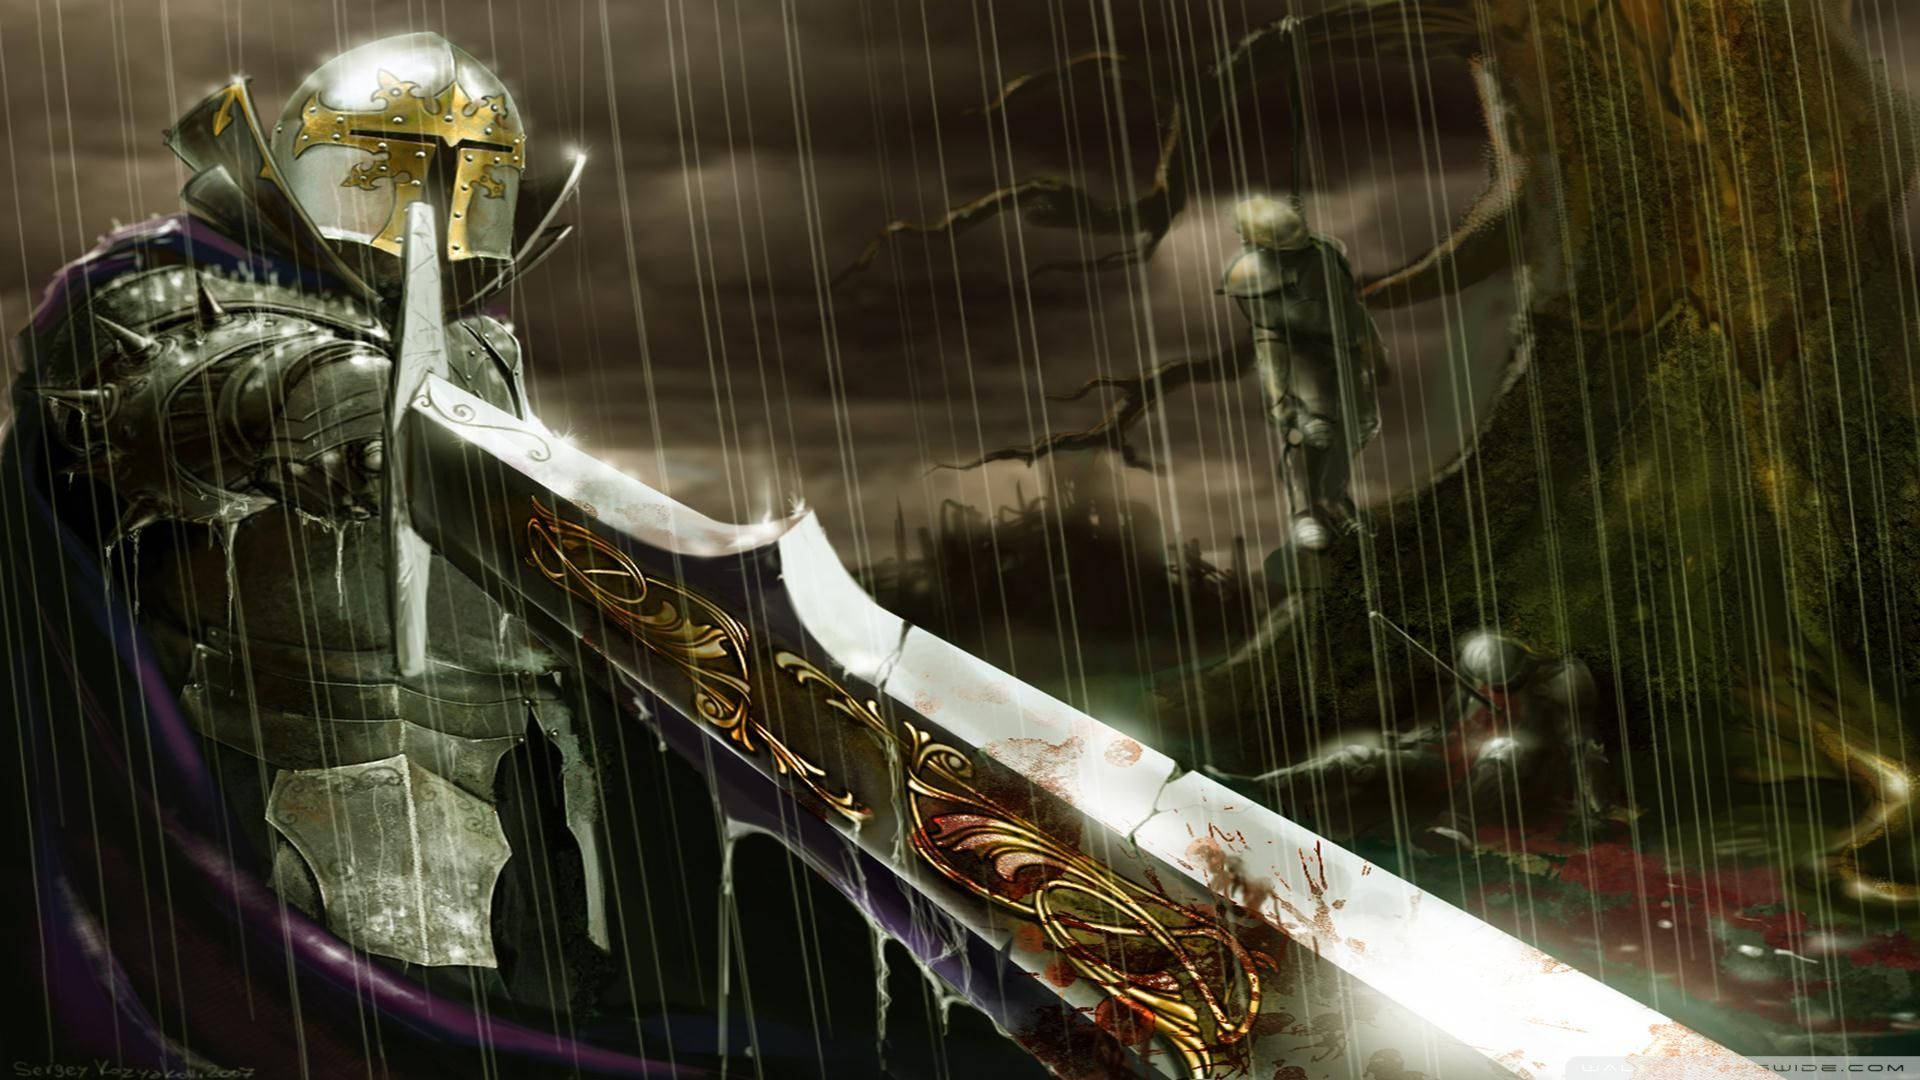 Brave Knight Holds Sword In Hand, Standing Before A Stormy Sky. Background